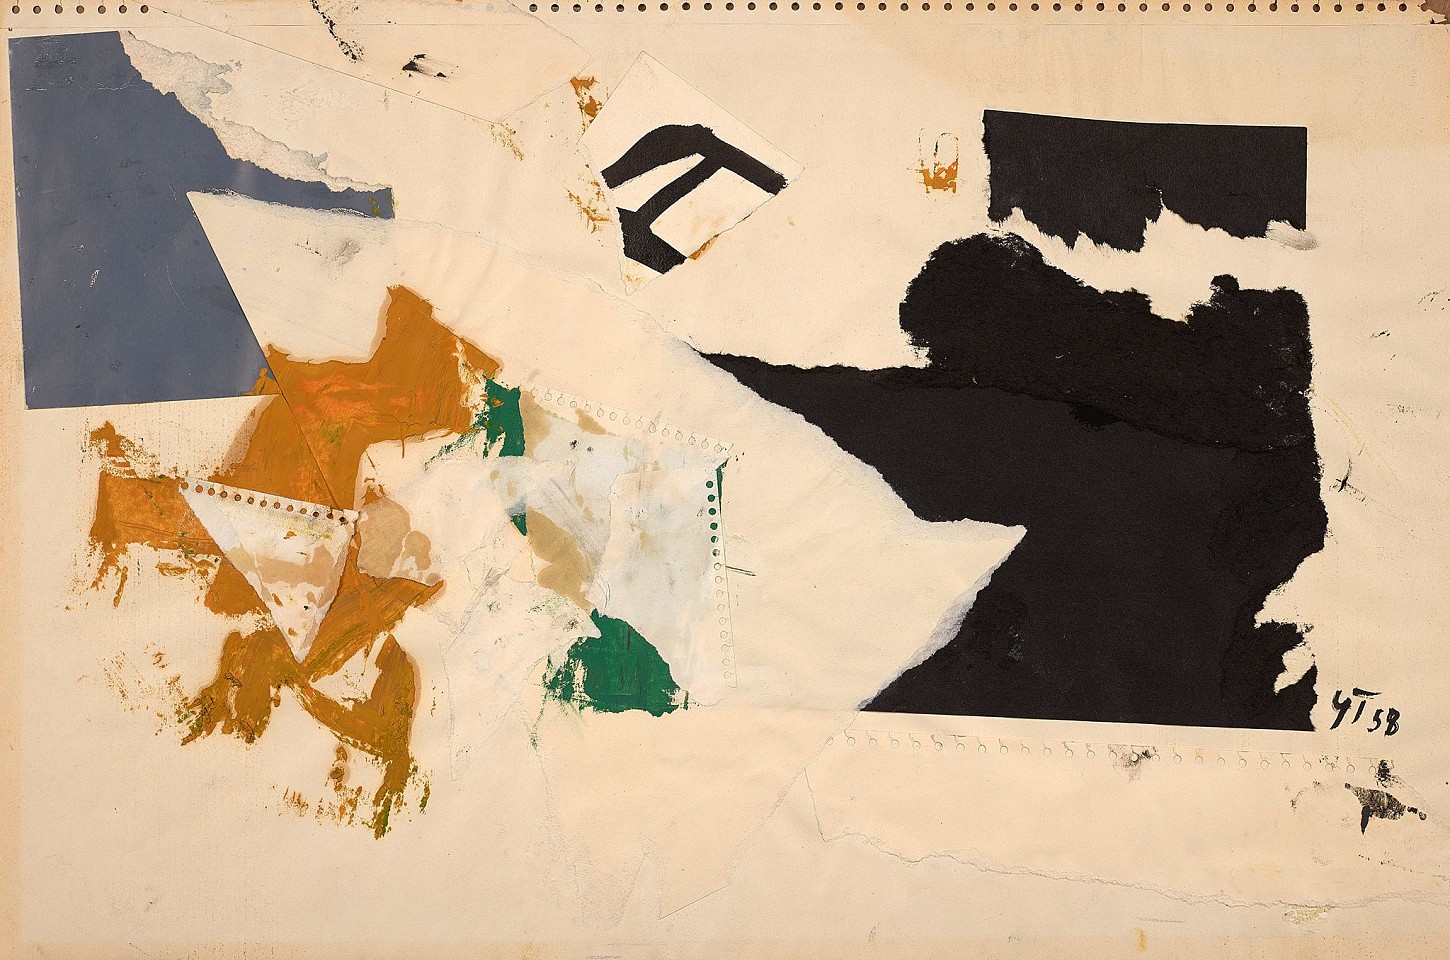 Yvonne Thomas, Collage, 1958
Collage, 13 3/4 x 21 1/4 in. (34.9 x 54 cm)
THO-00056